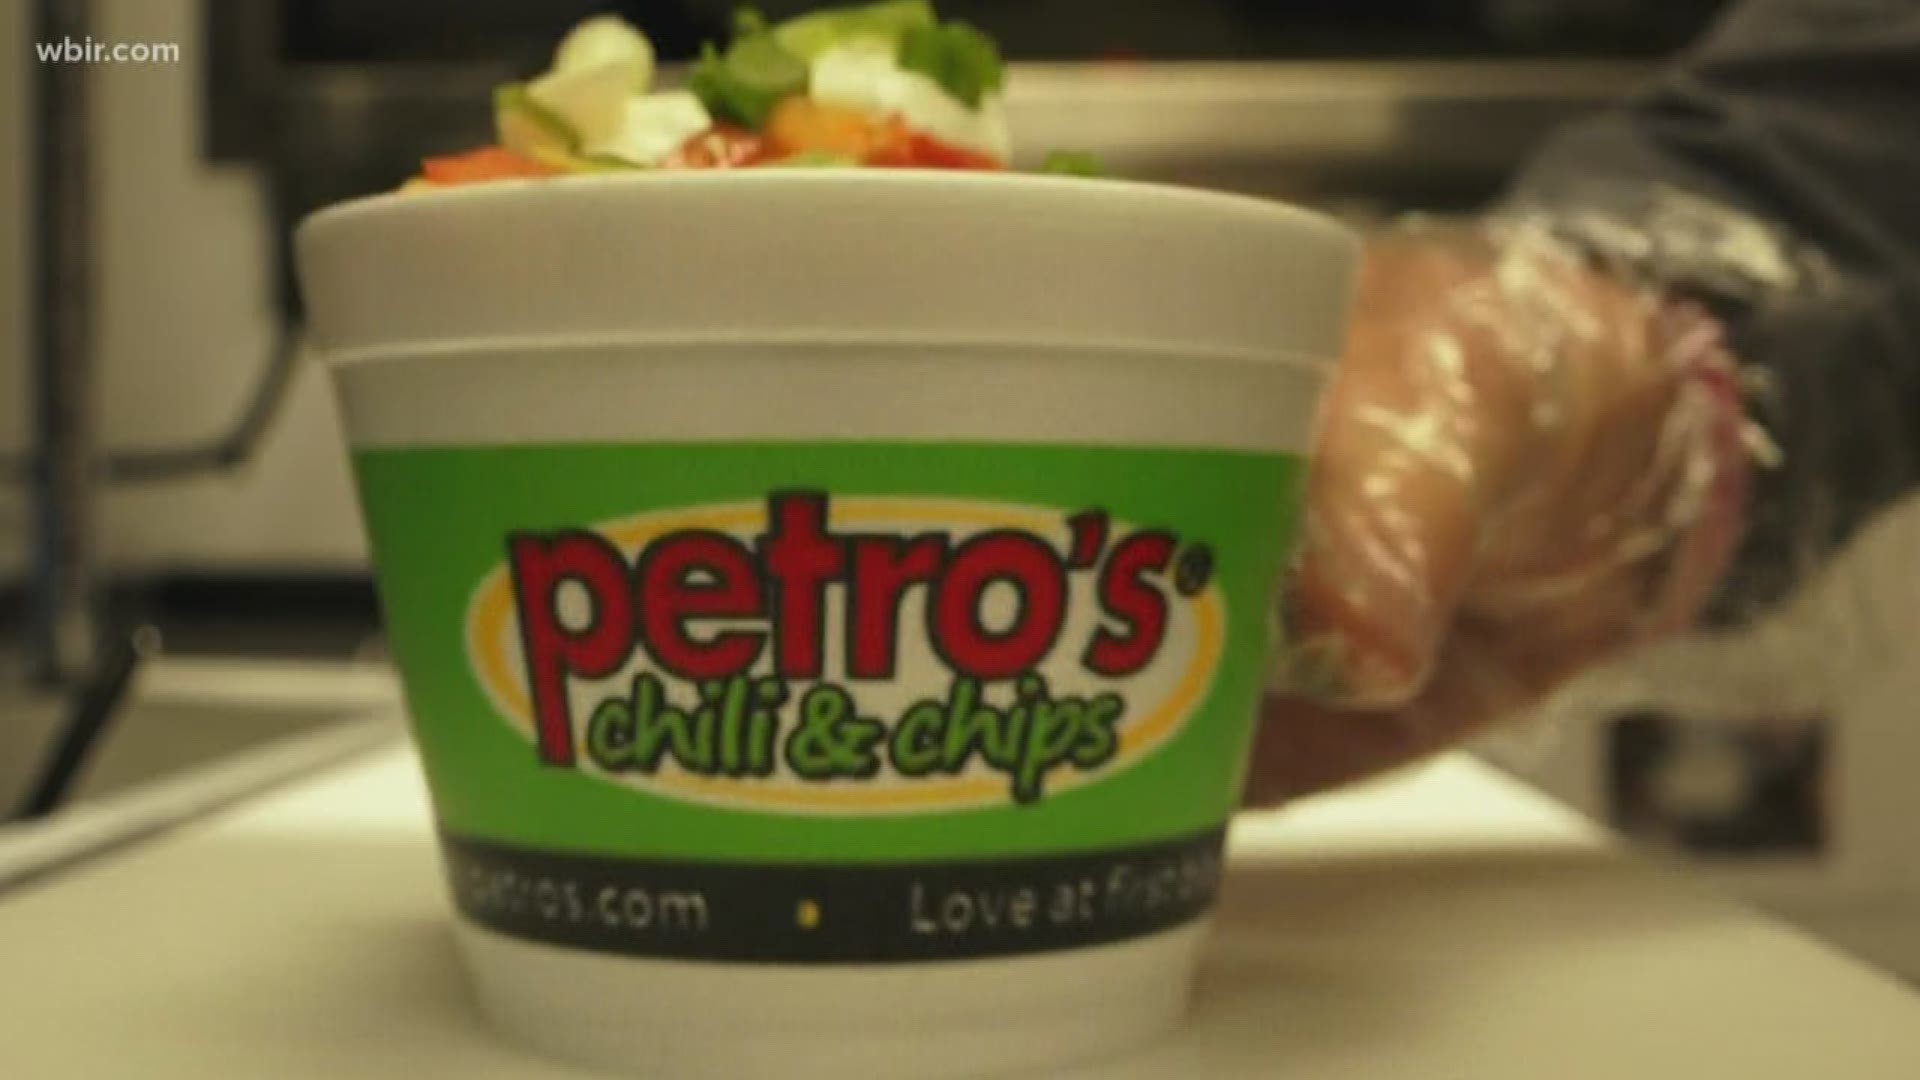 36 years after the World's Fair, the family who started Petro's Chili and Chips is opening a restaurant just a few blocks away from where it all started.